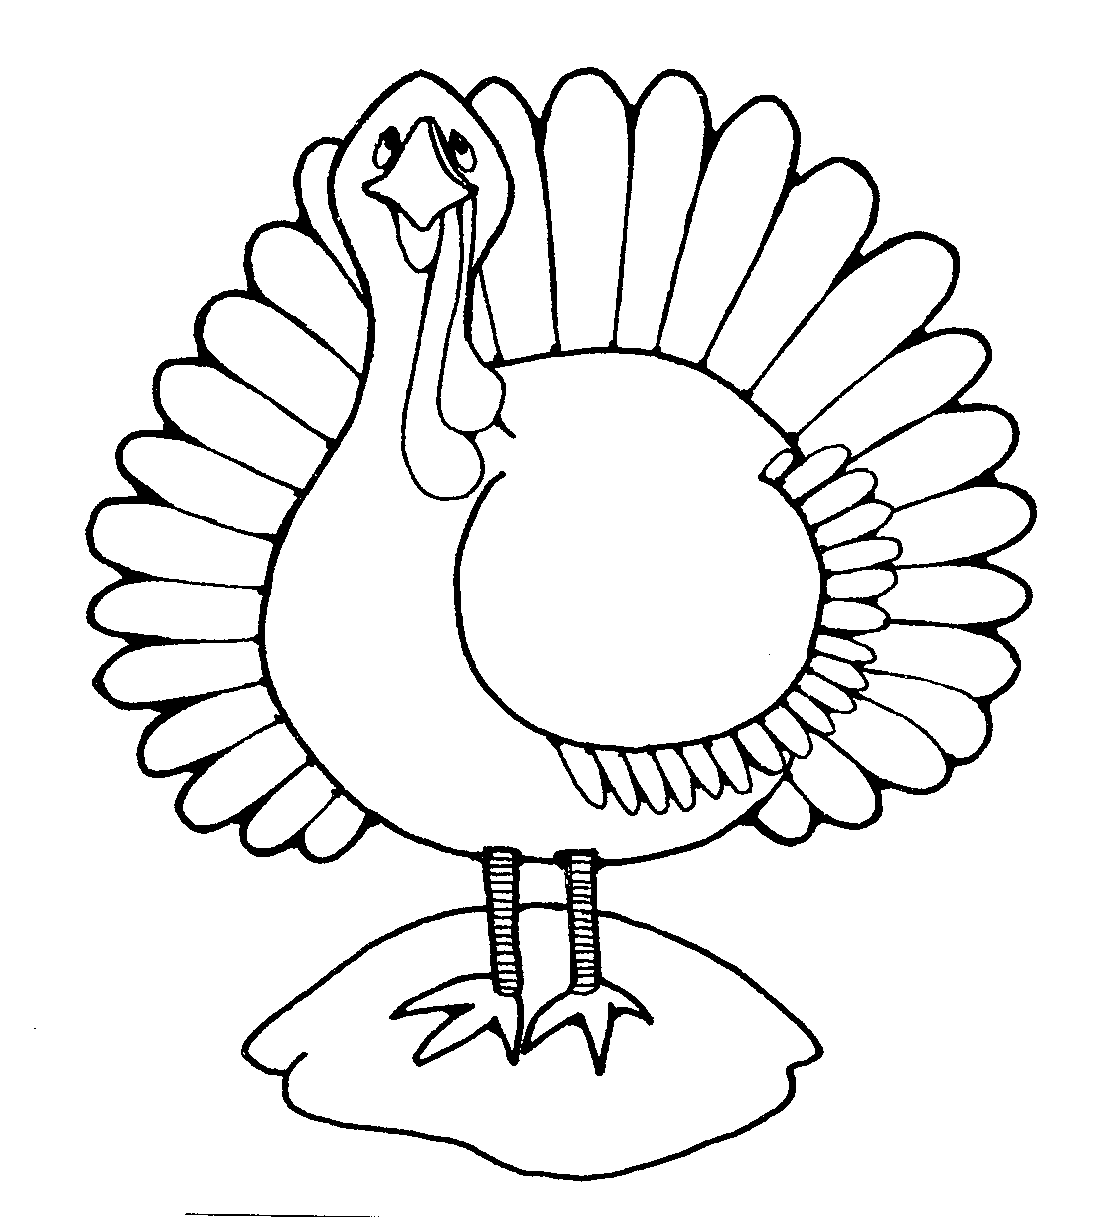 Clipart turkey drawing. Free cliparts download clip